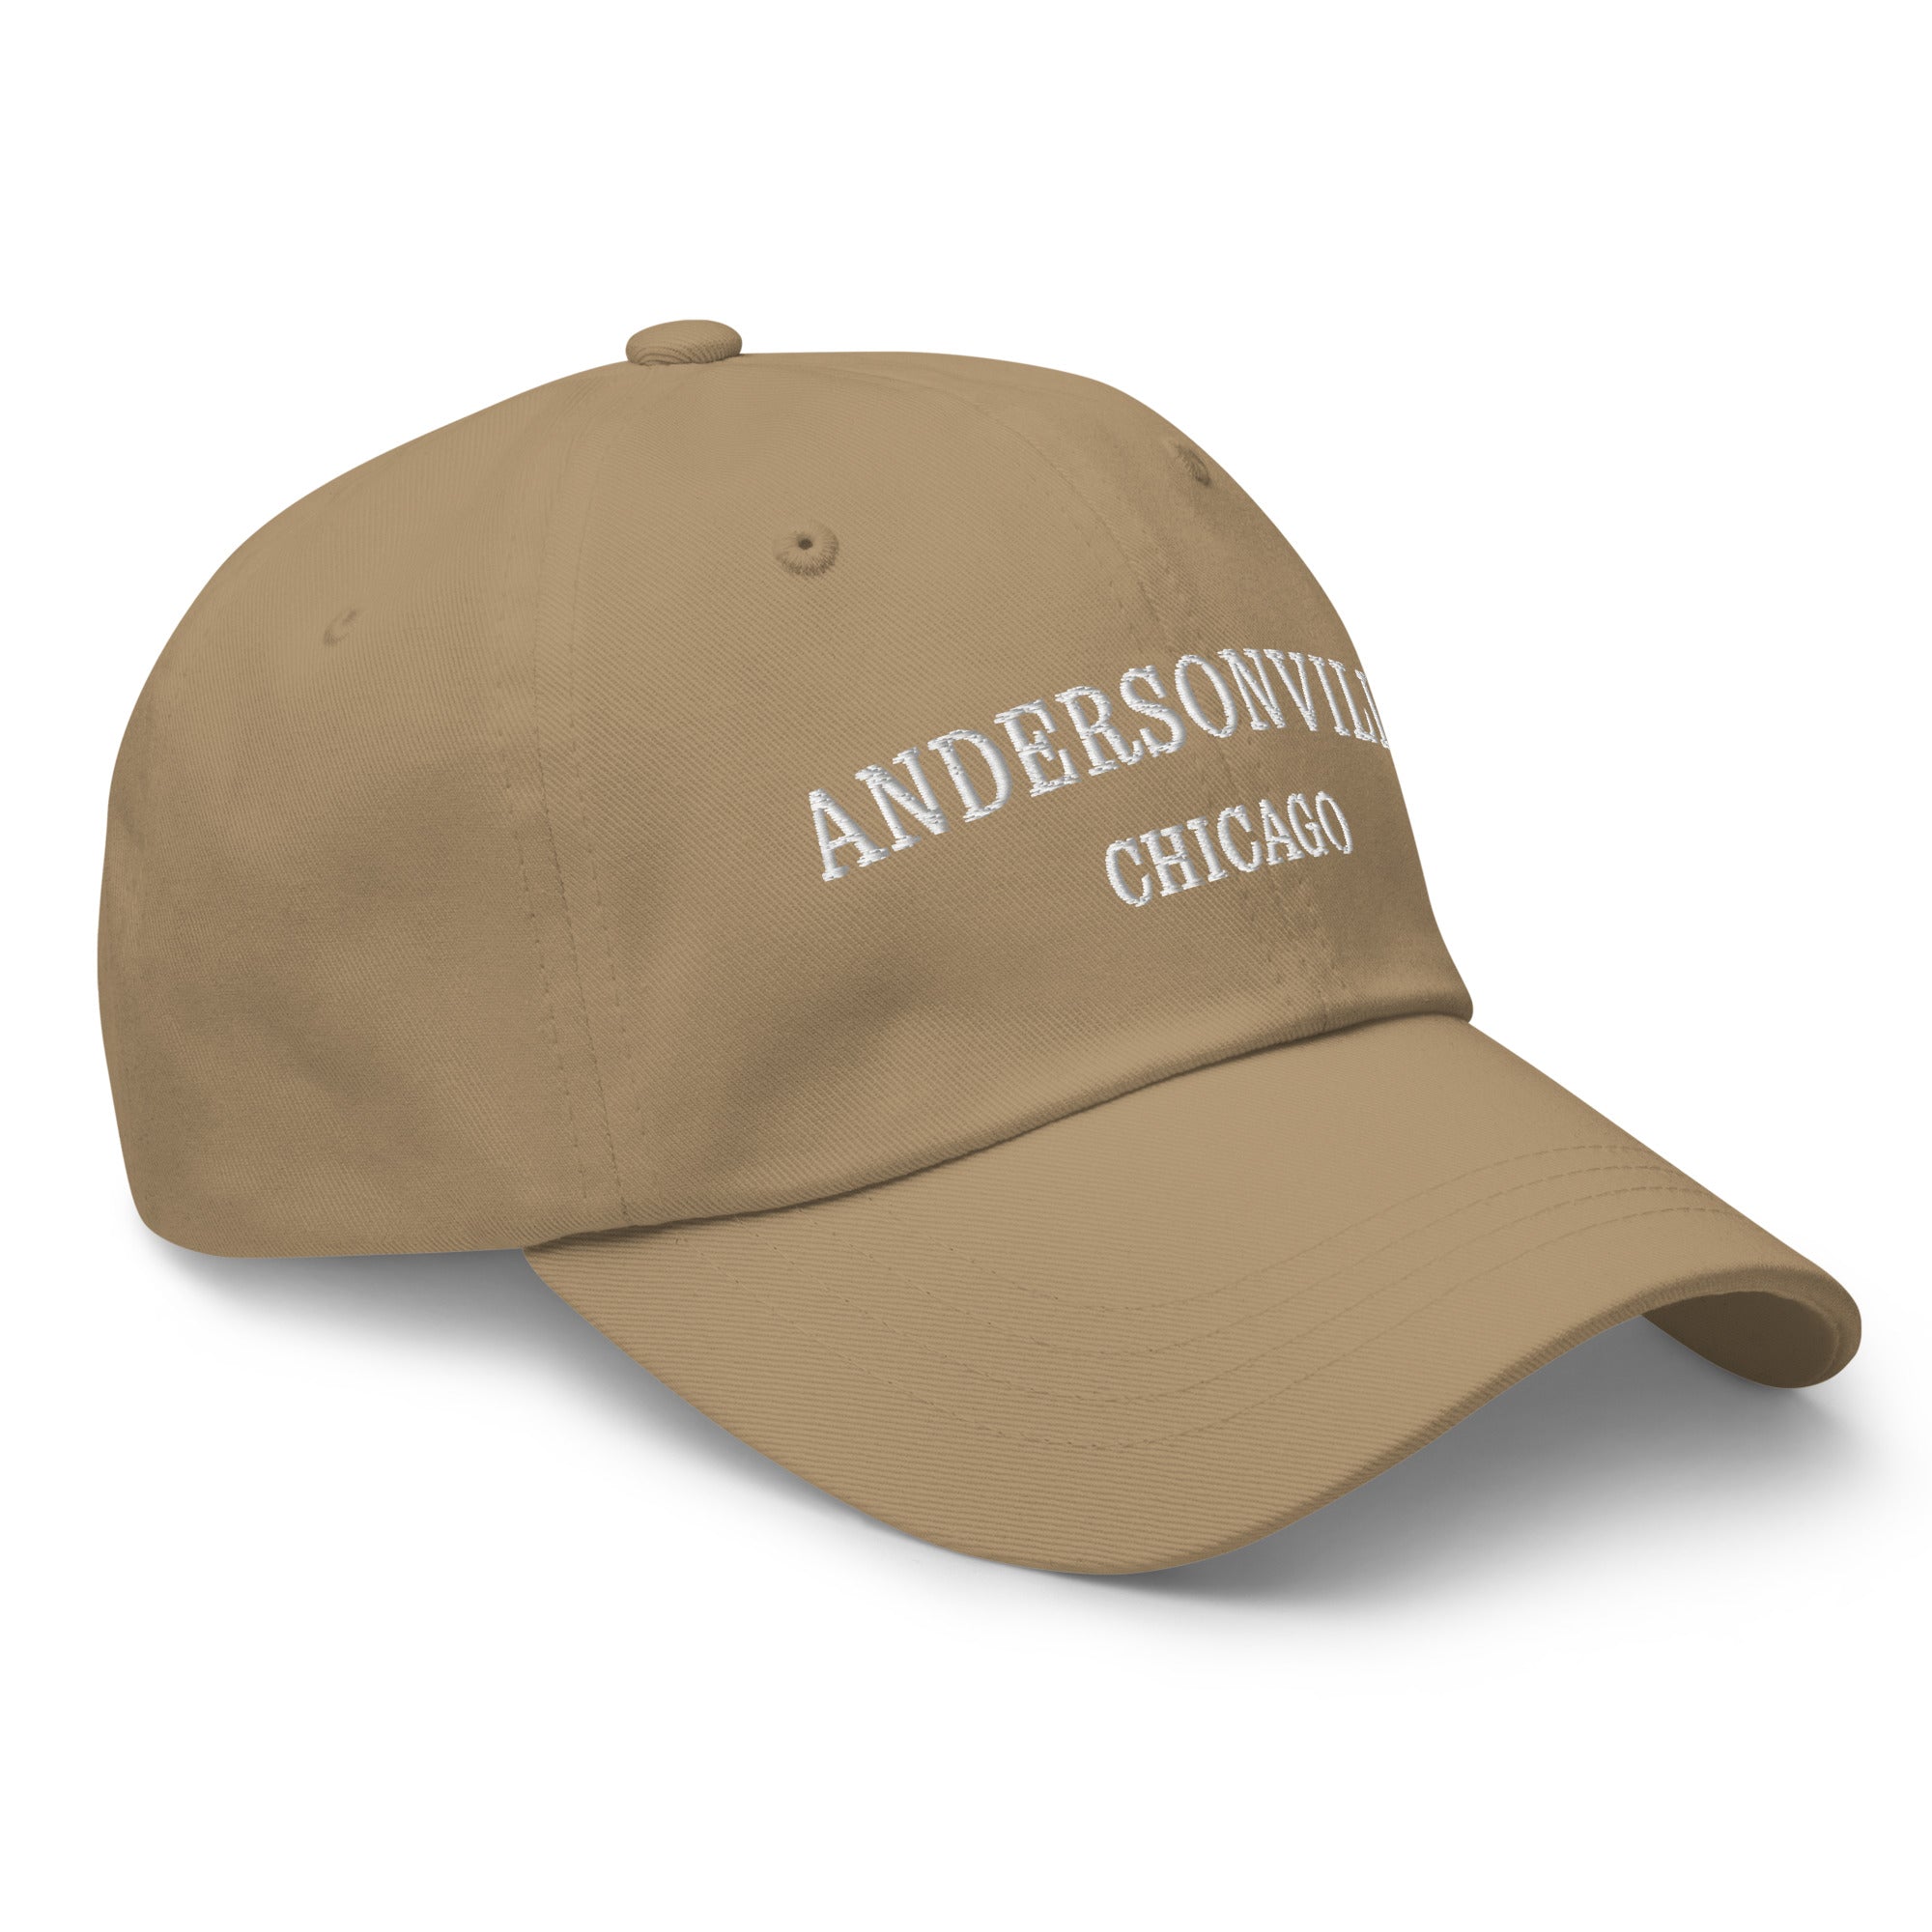 Andersonville Chicago Dad Hat